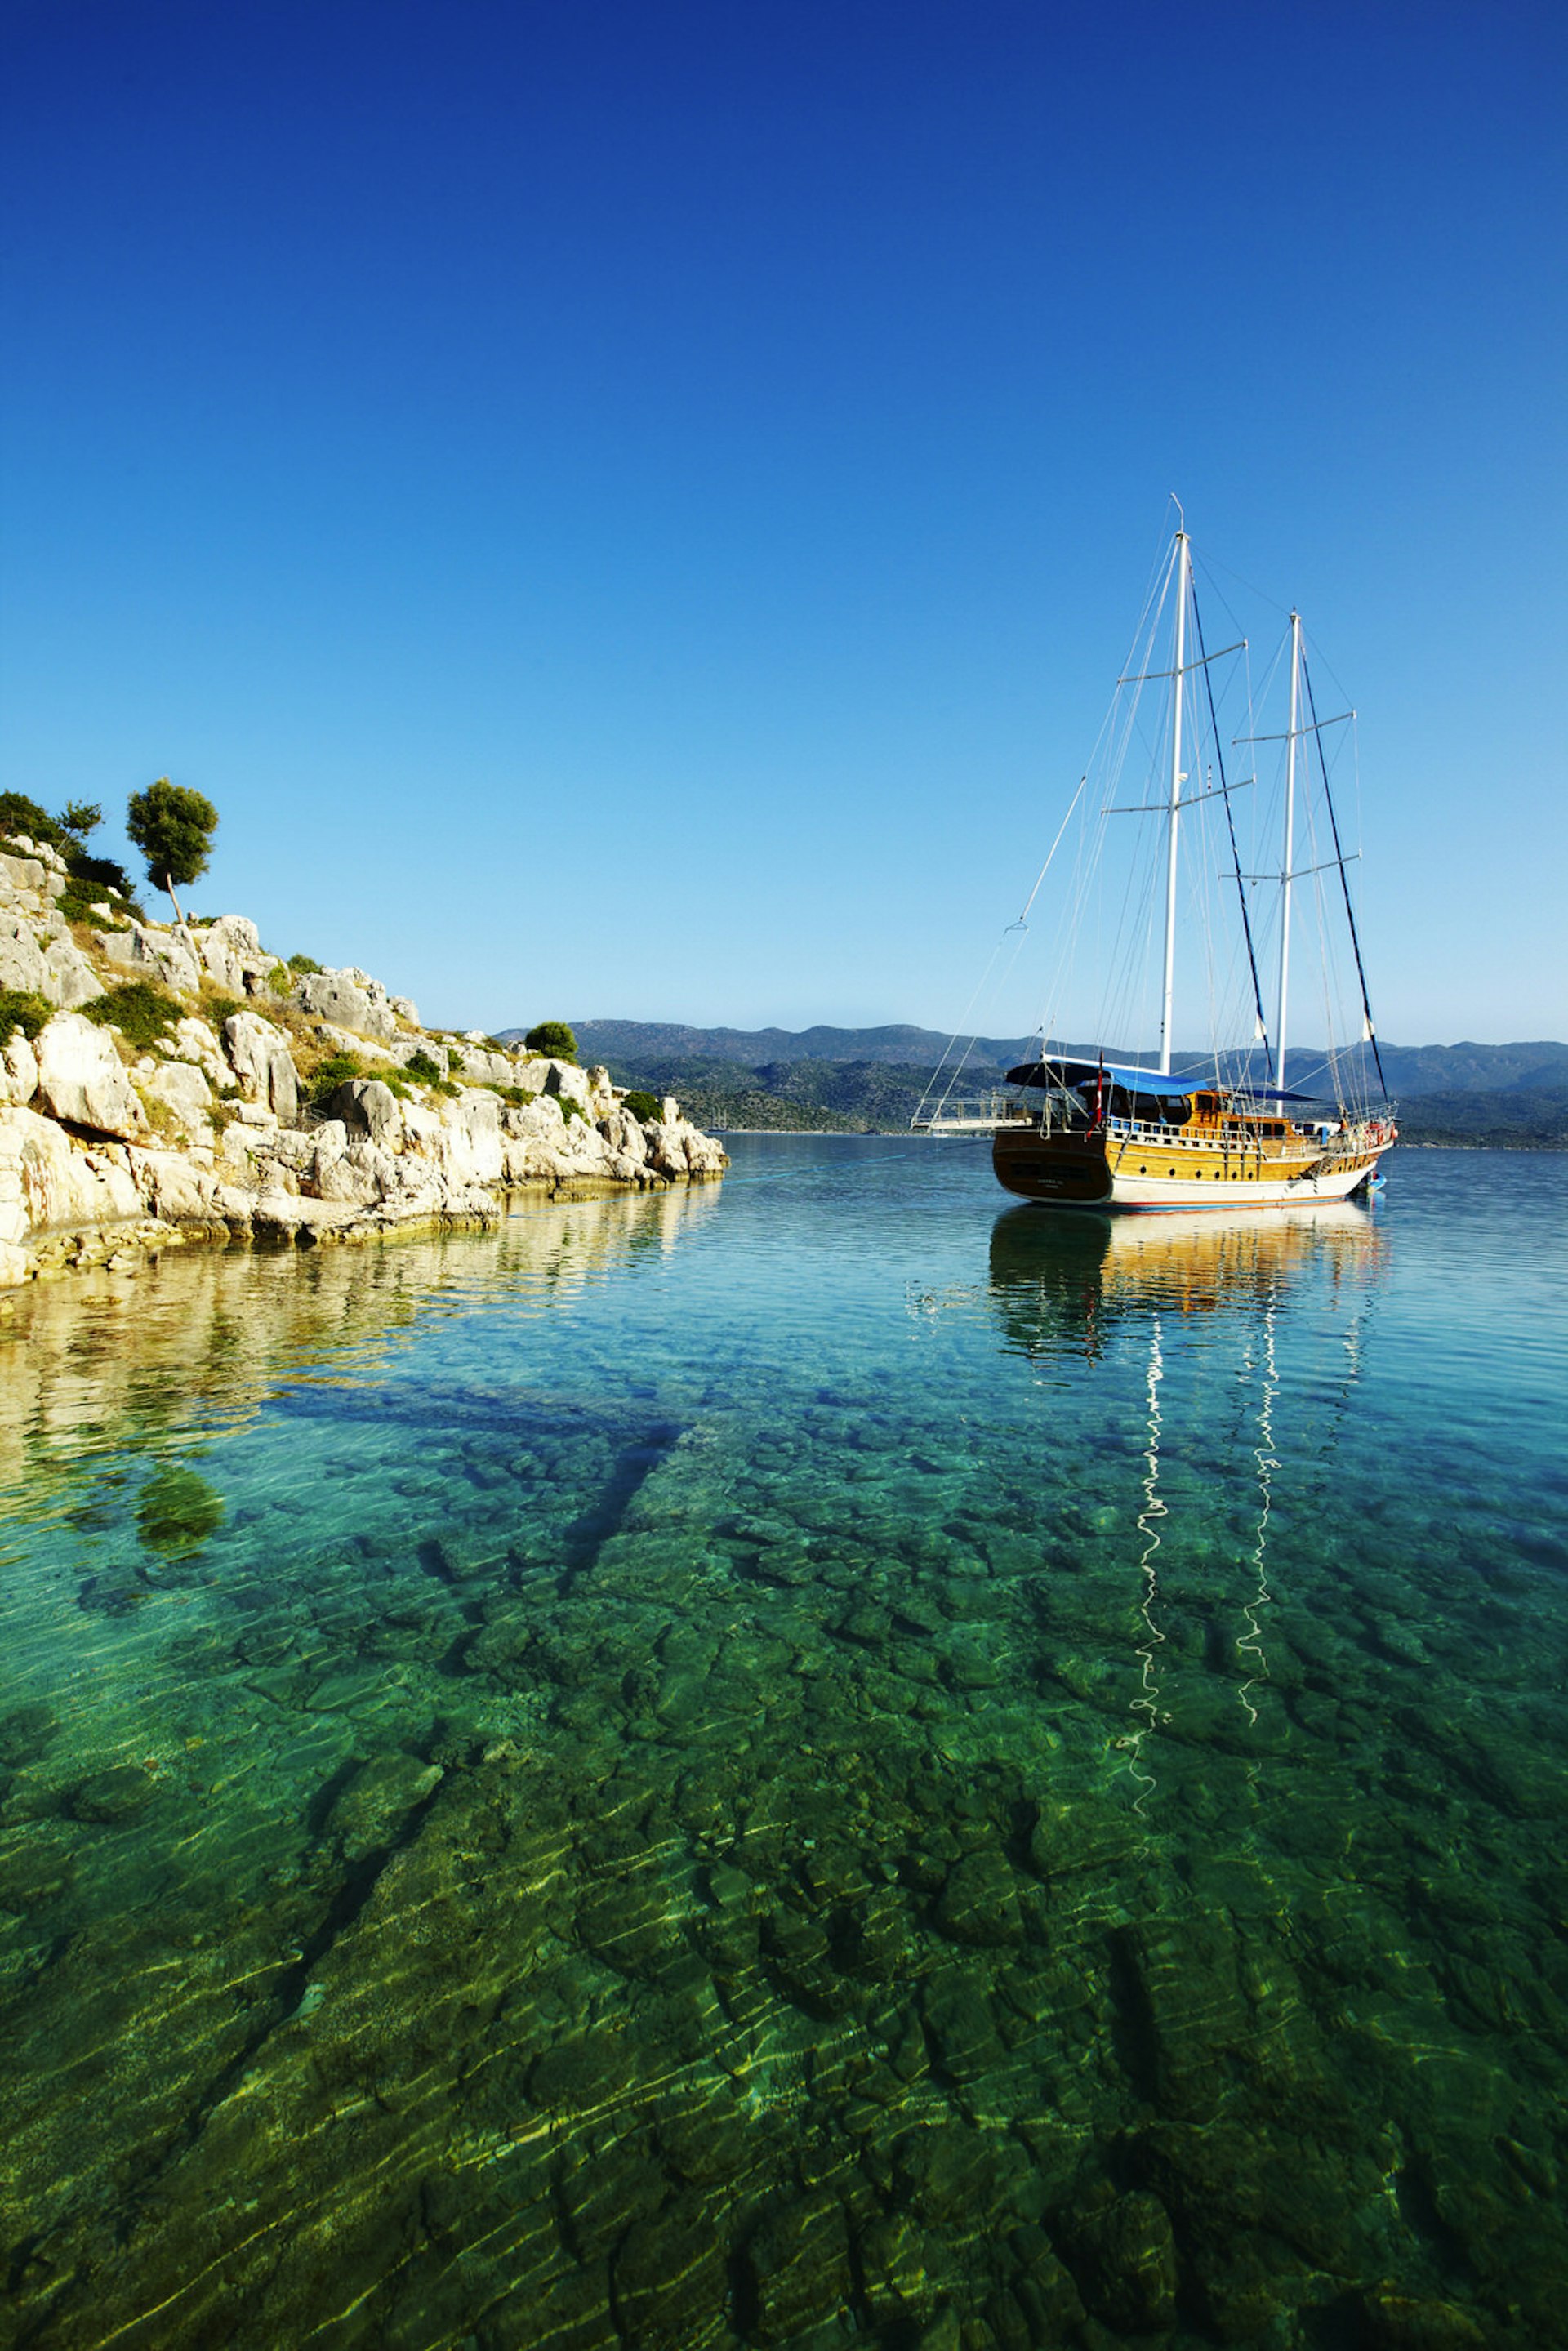 Sunken ruins can be seen below the surface of the clear blue-green waters, with a traditional wooden Turkish sailing boat in the background